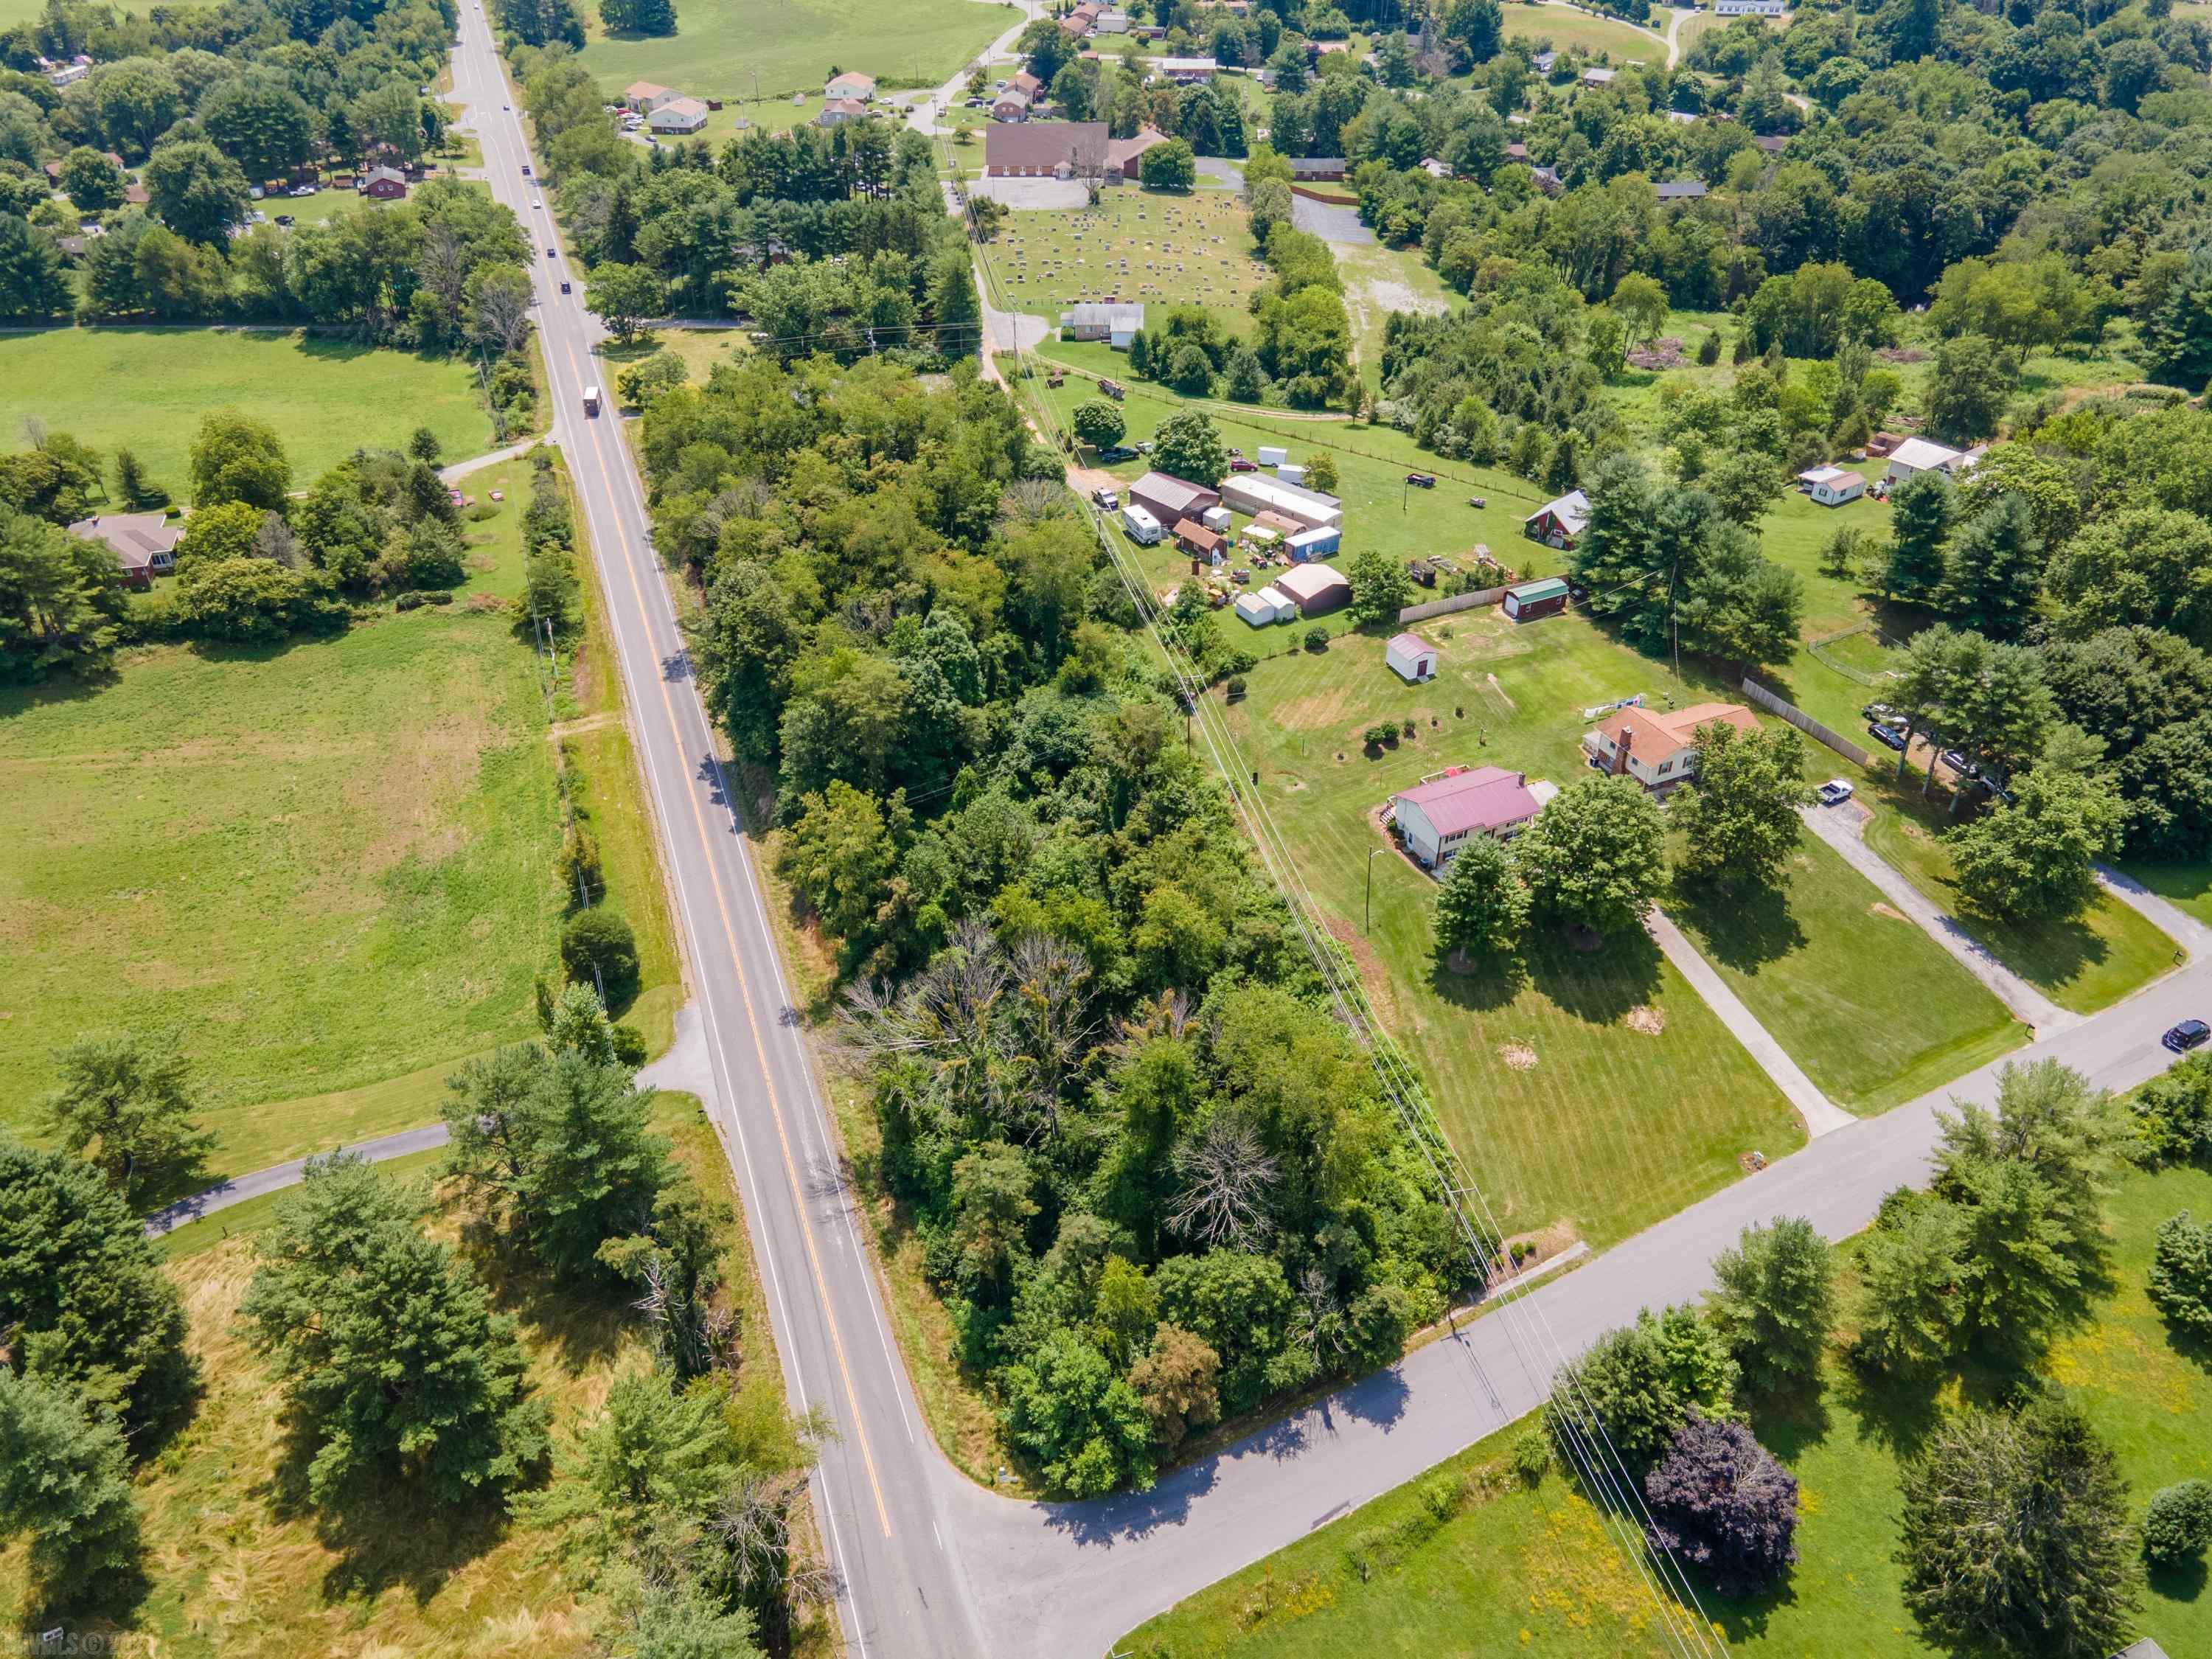 Great opportunity to purchase a 1.783 acre lot on the corner of Peppers Ferry Road and Rolling Hills Drive in Christiansburg. The parcel has 576 ft. of prime road frontage on Peppers Ferry and 122 ft on Rolling Hills and is located just minutes from Virginia Tech and Radford University.  A new survey has been completed and the corners are marked. Excellent location for convenience and visibility.